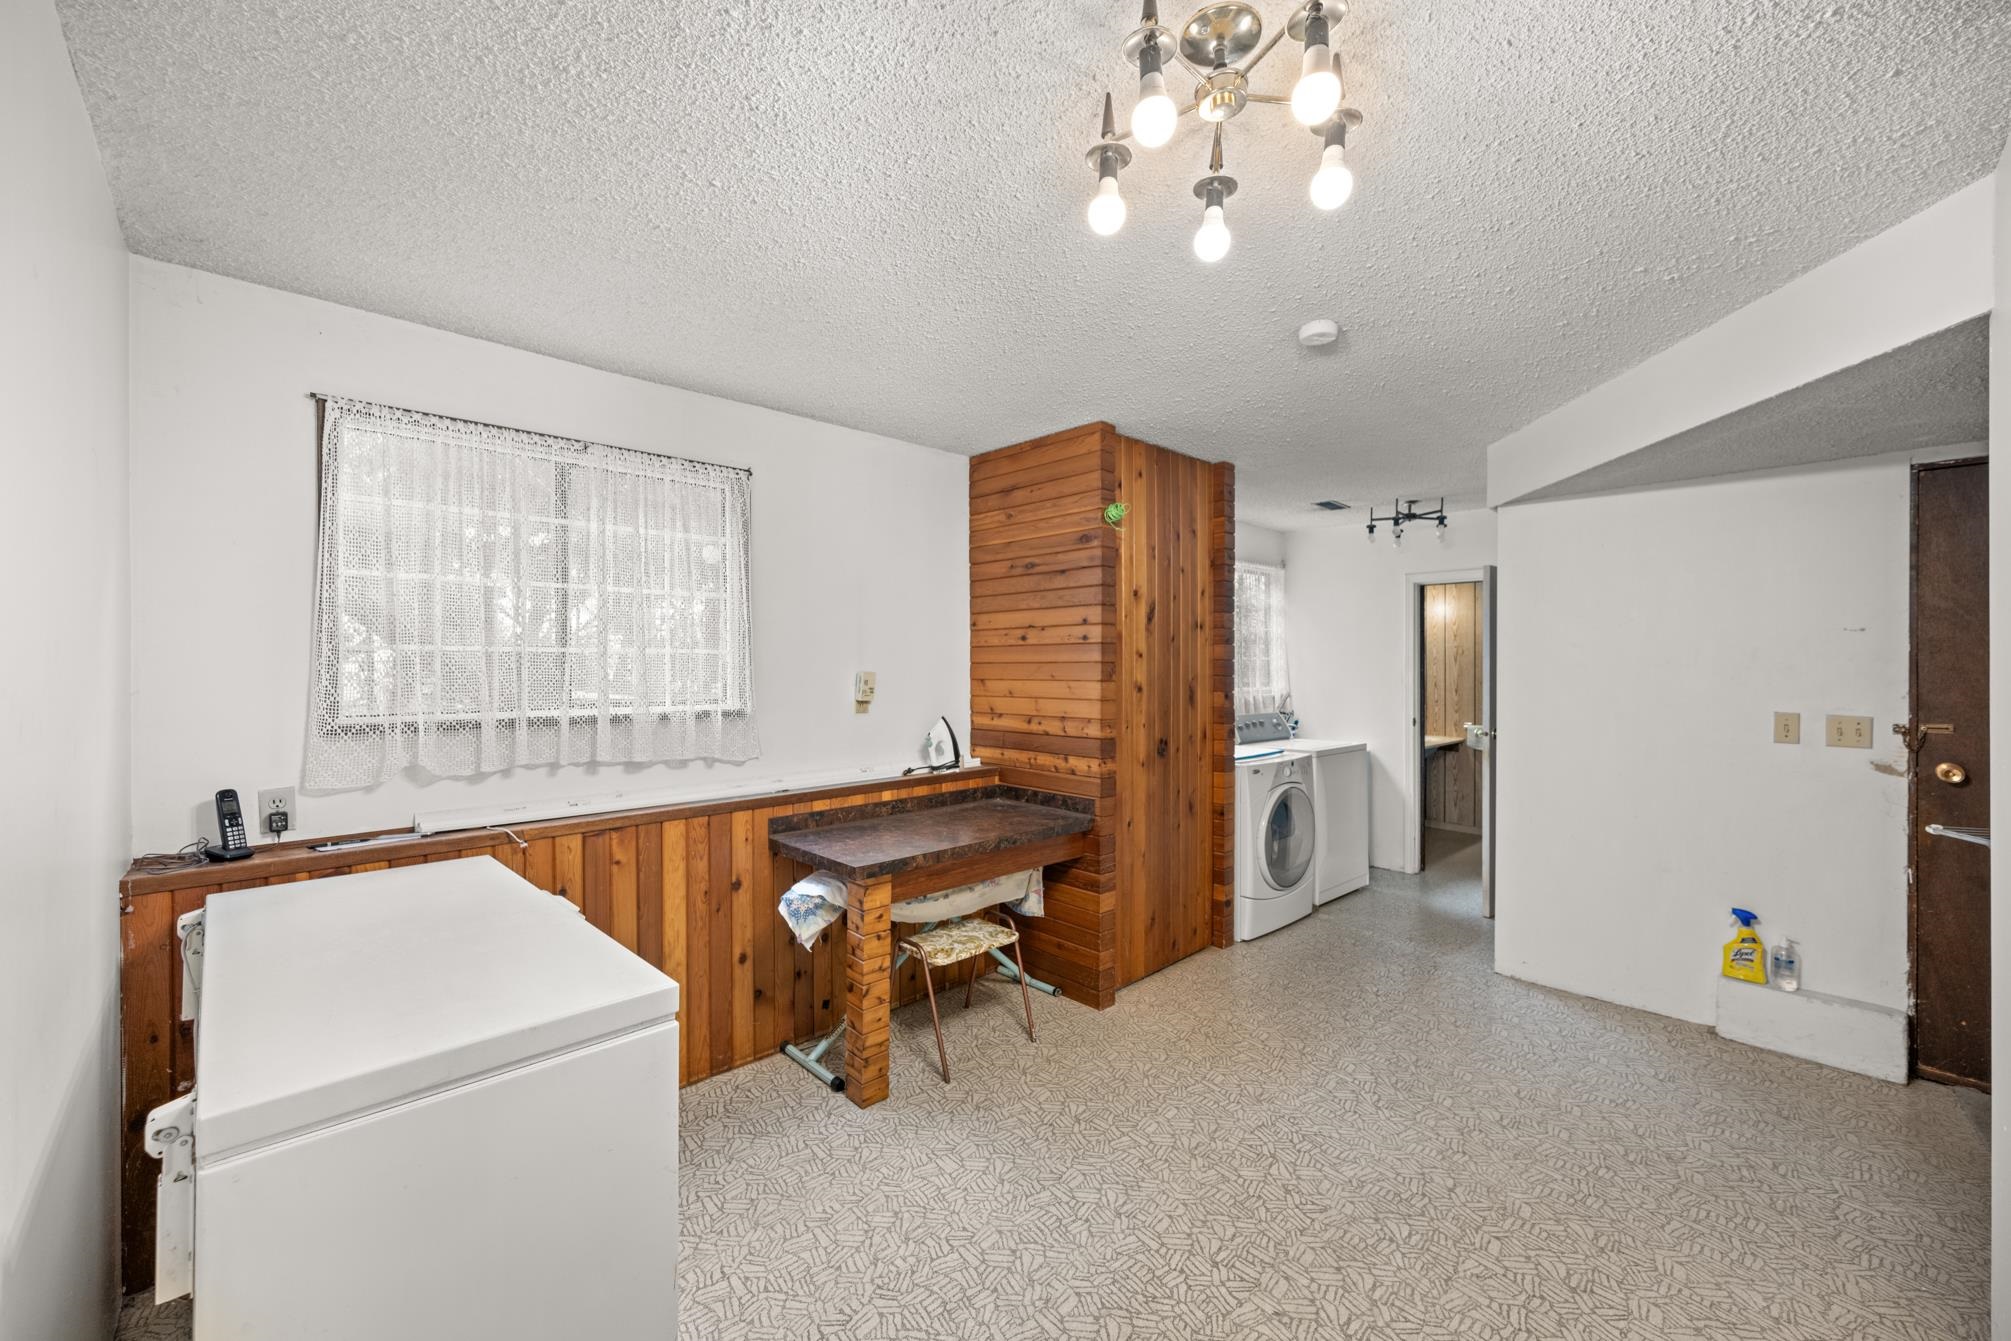 Listing image of 1801 MADORE AVENUE